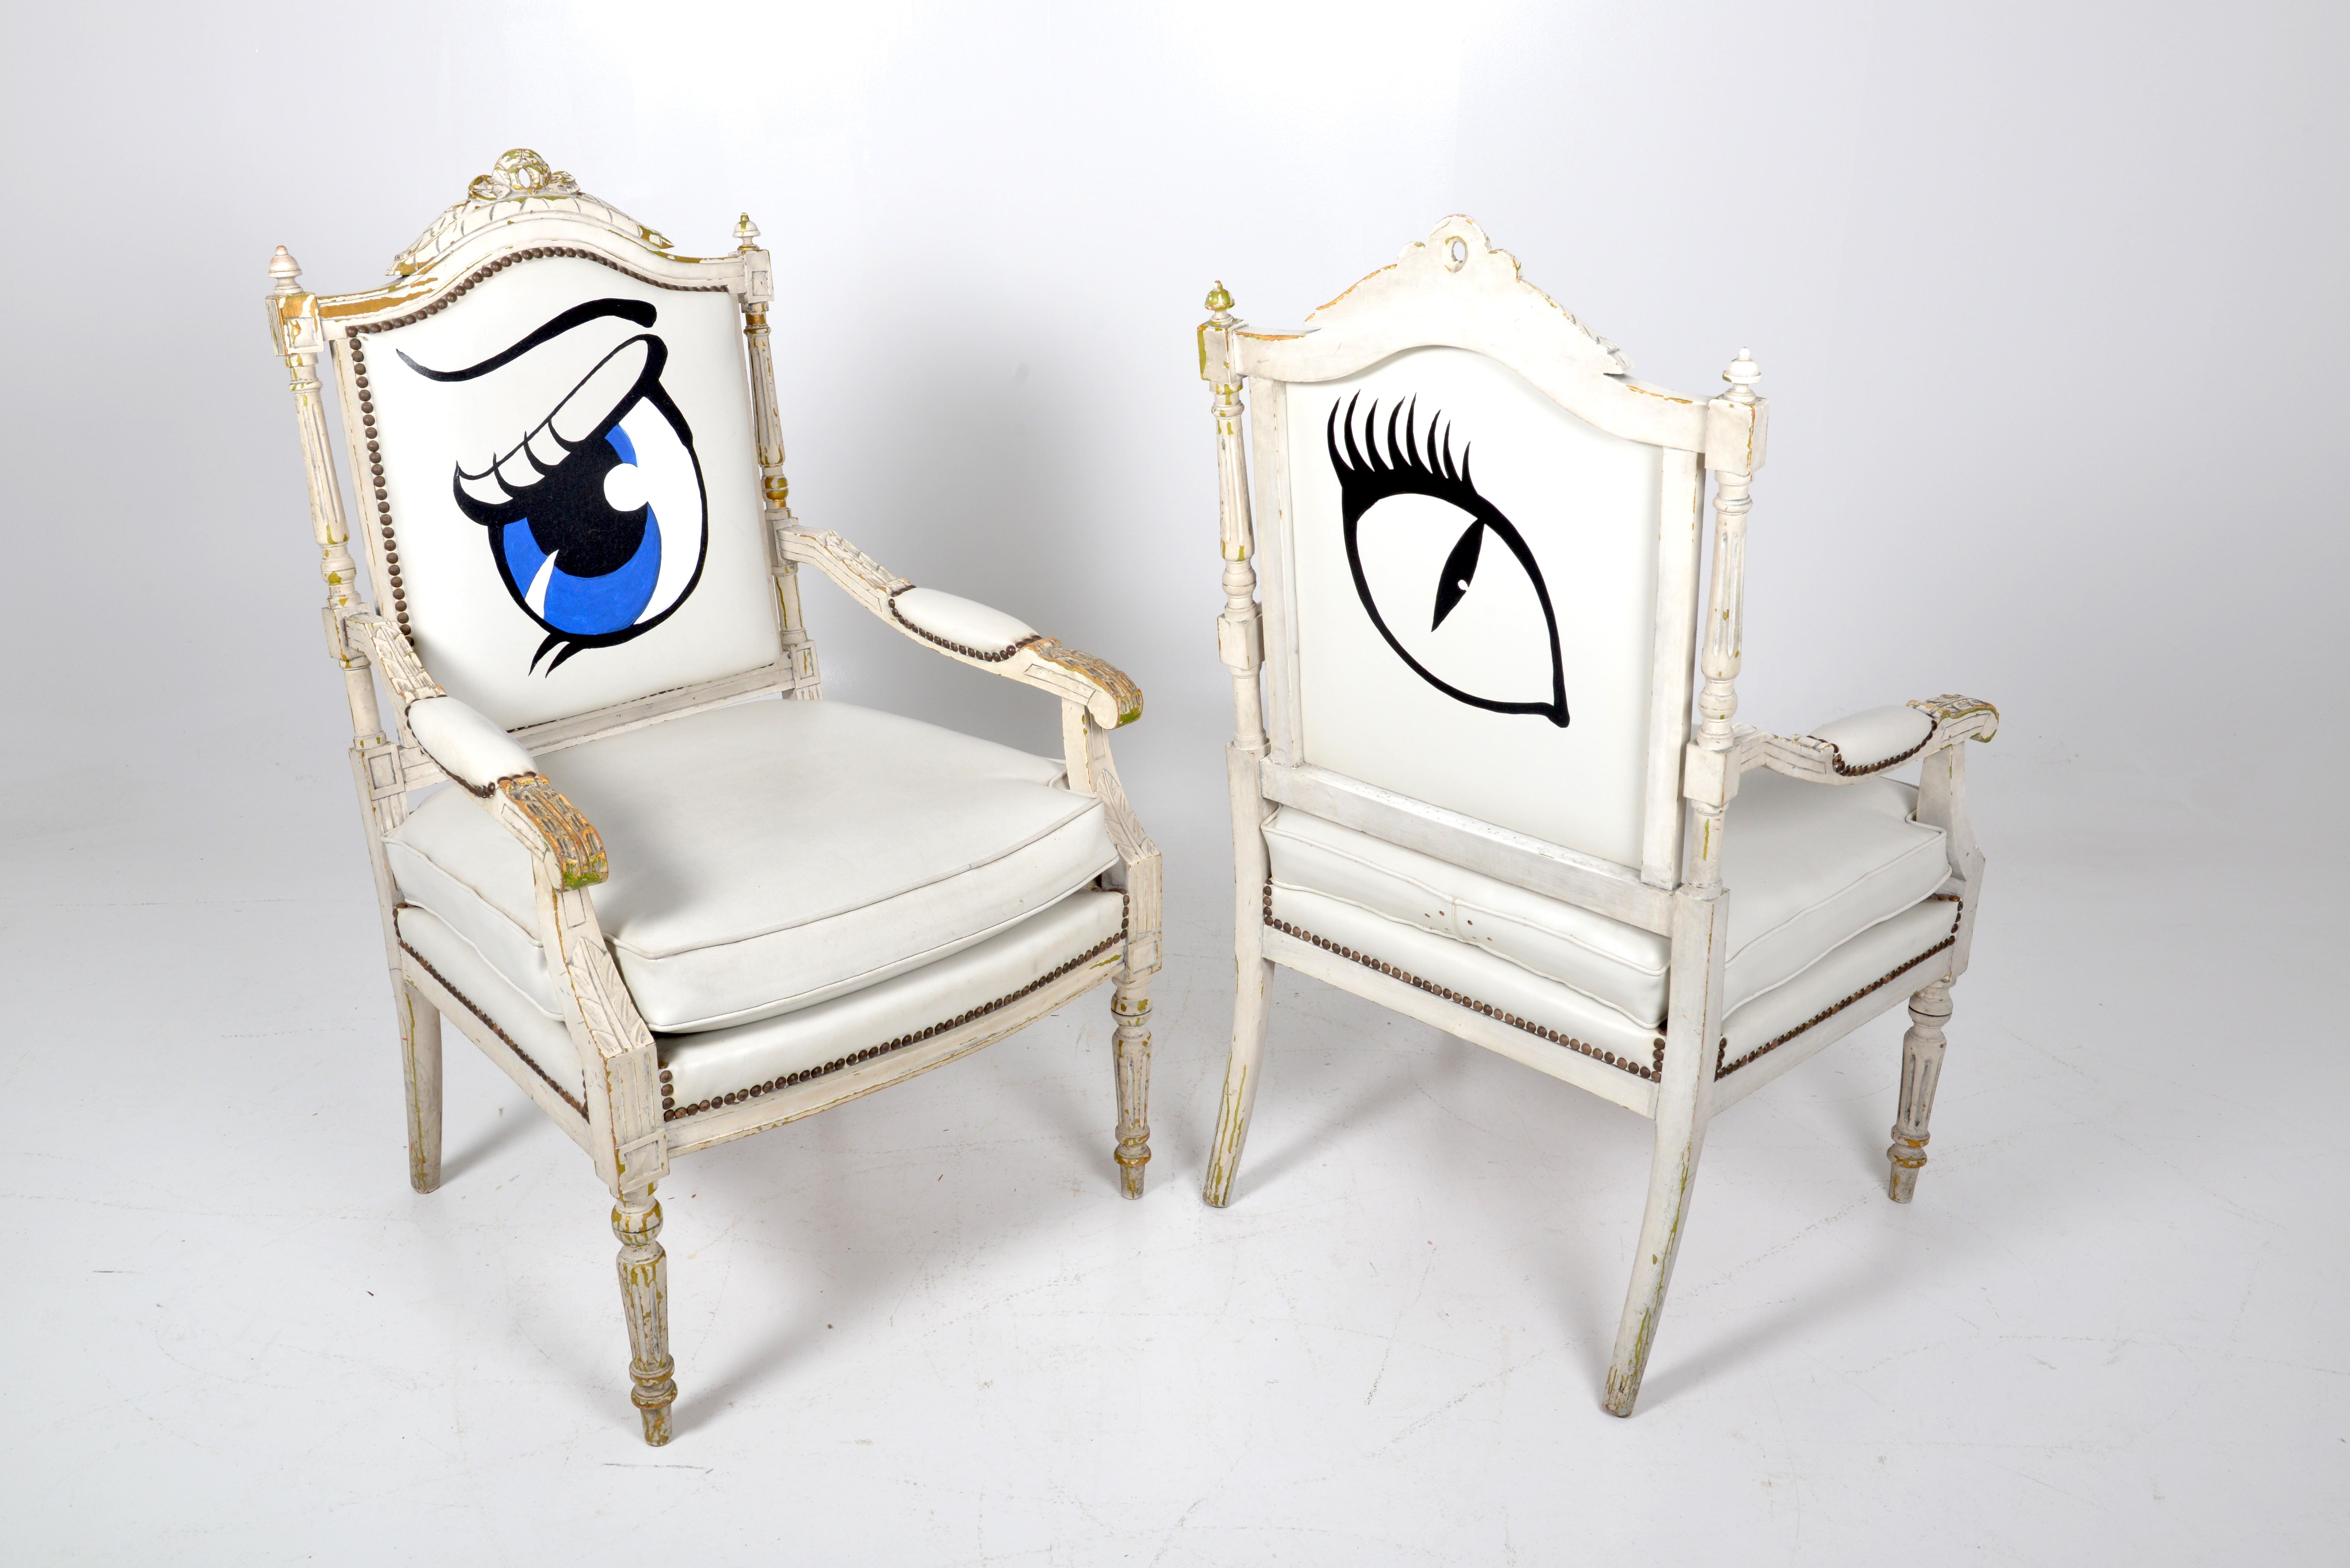 Pair of white painted french Louis XVIth revival armchairs, circa 1900.
Whimsical pair of French Louis XVI style or neoclassical fauteuil armchairs featuring a white painted frame. The square seat and back are supported by turned and fluted legs